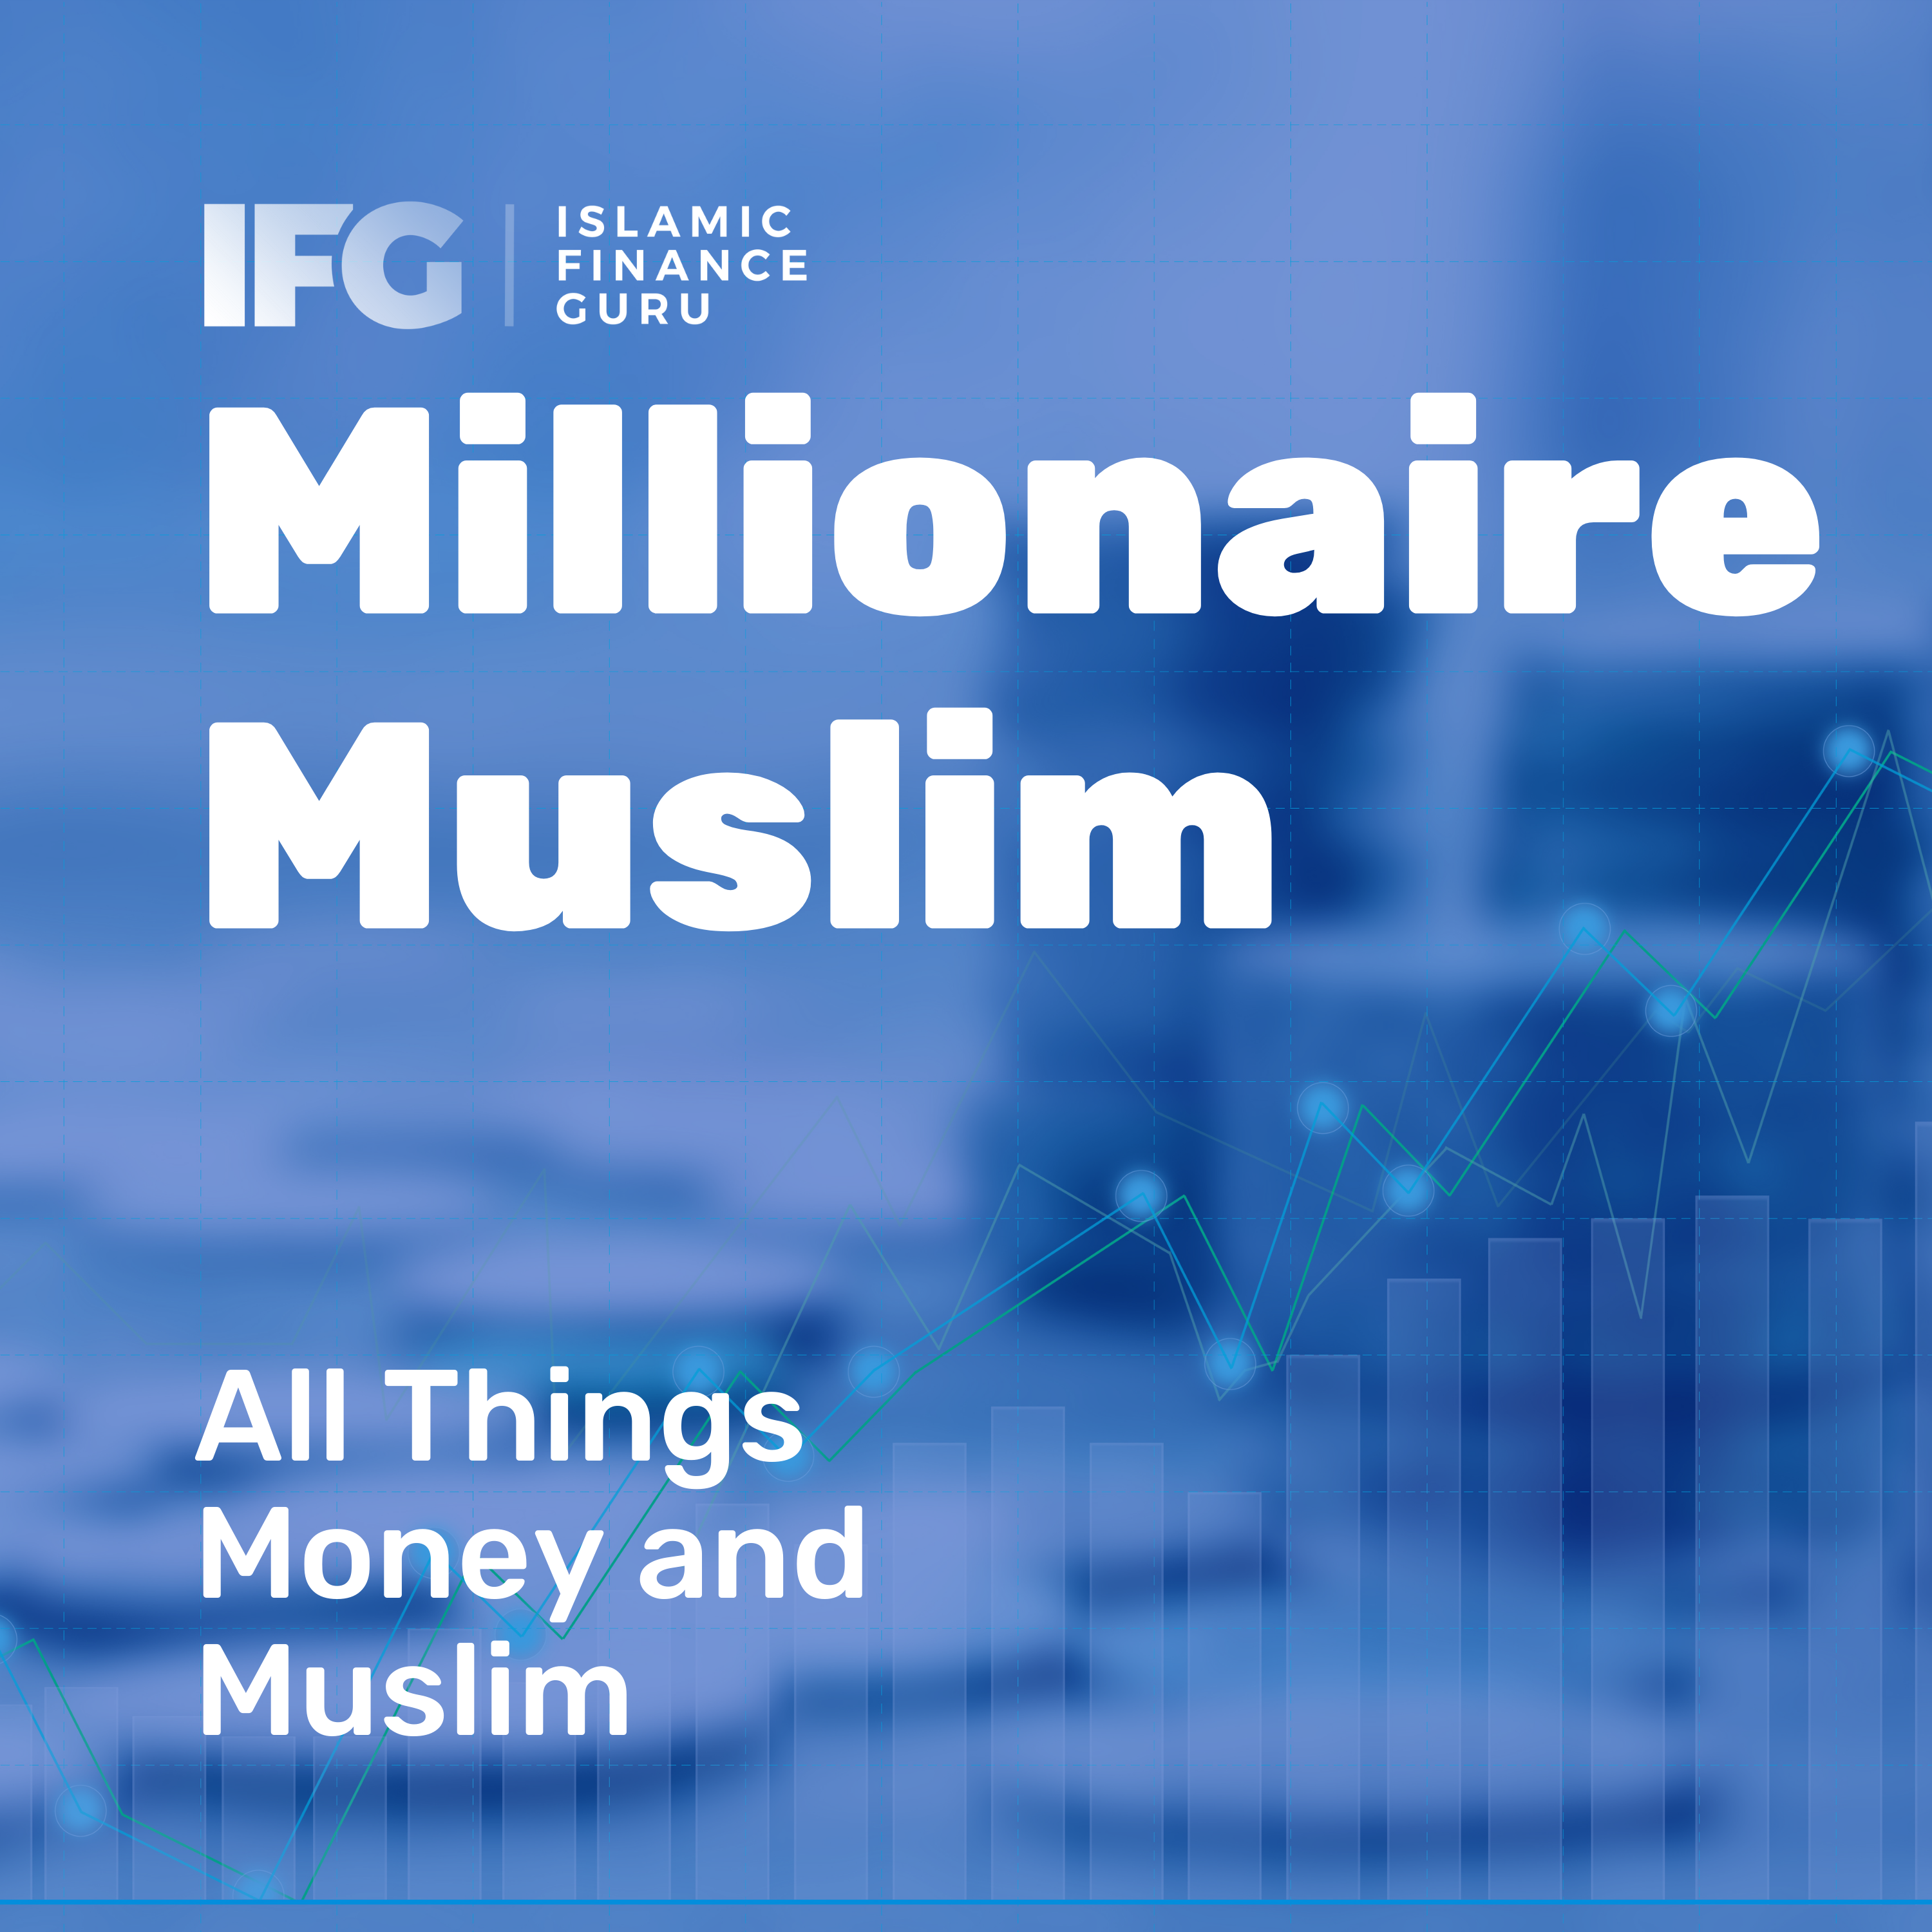 E48 Podcast: Secret Investment Investors Make Millions | IFG Featured Image